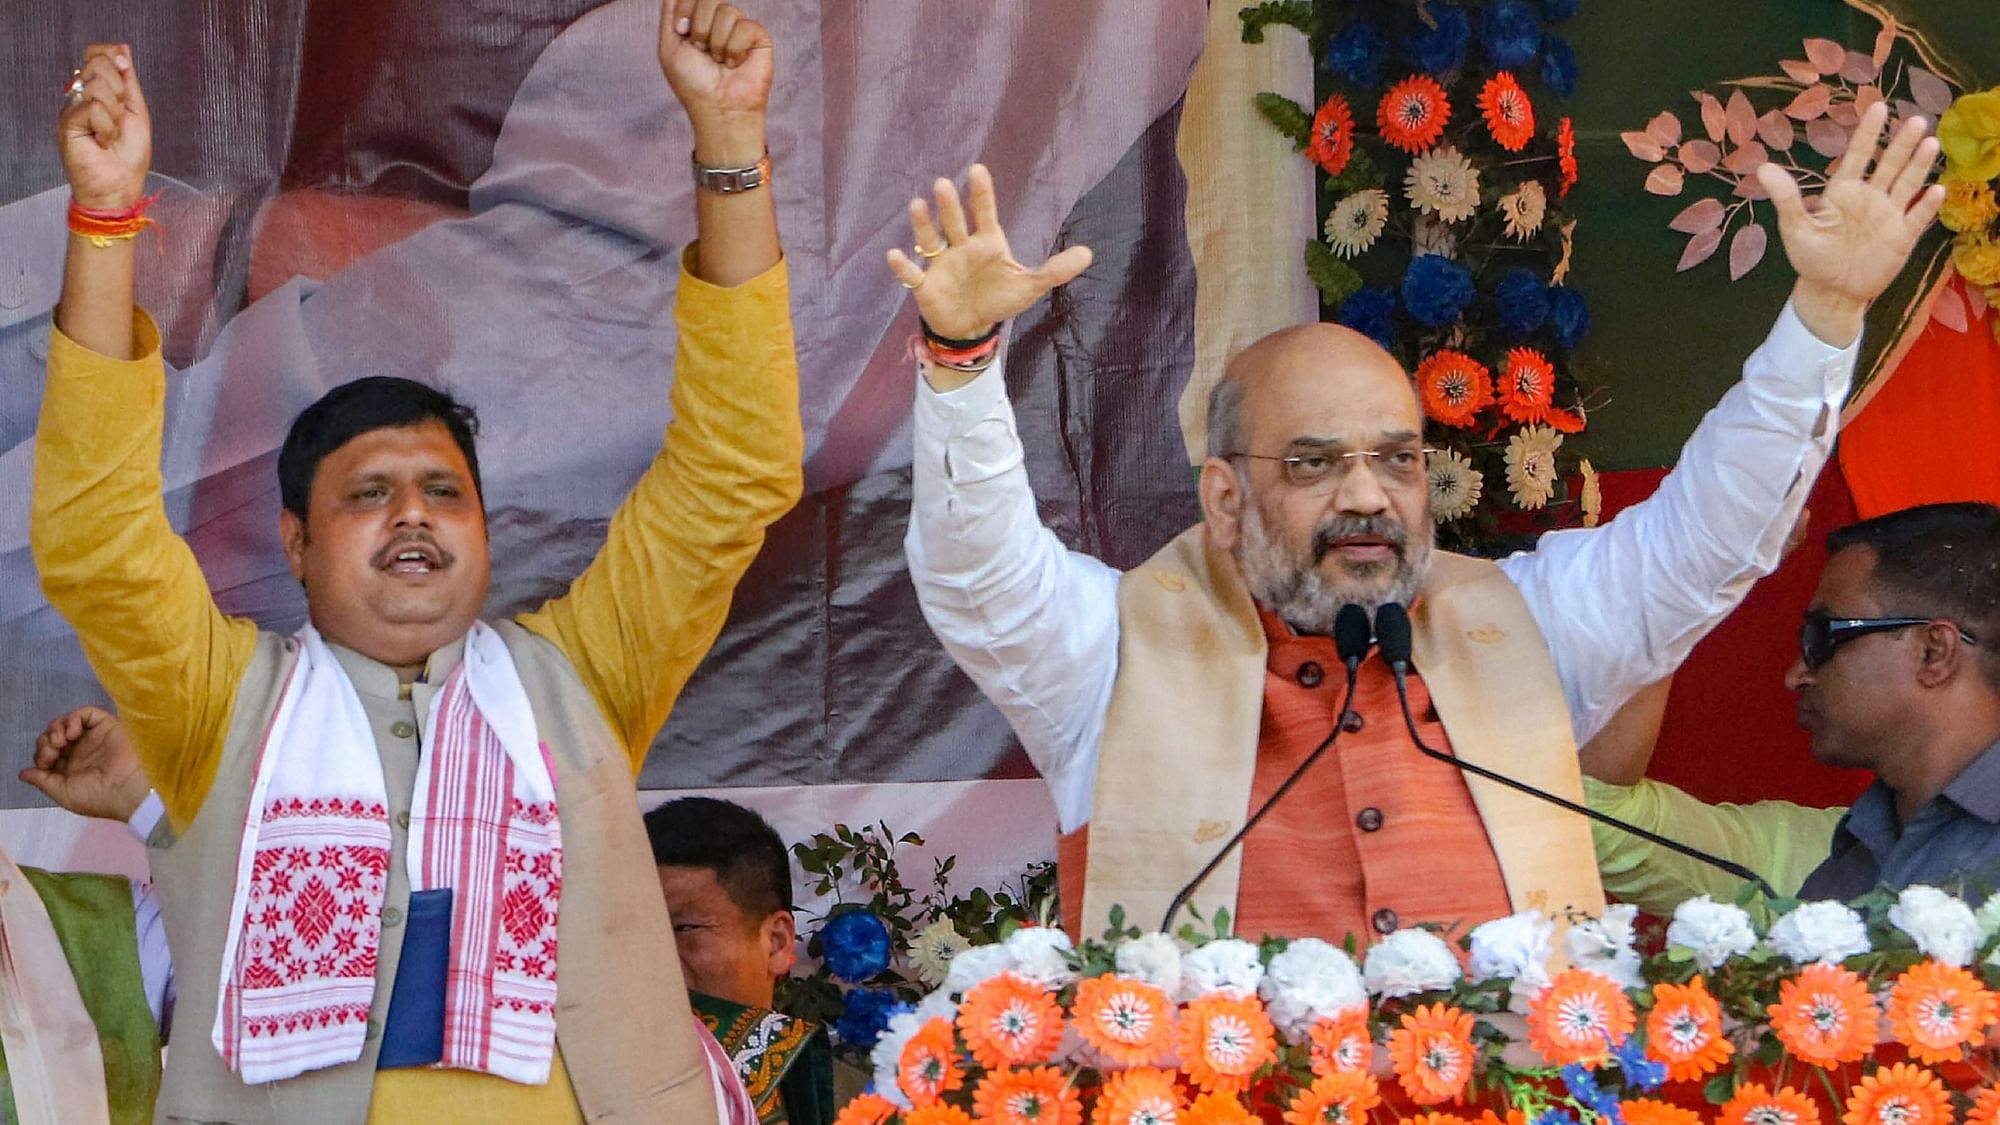 BJP President Amit Shah addresses an election campaign rally in support of Asom Gana Parishad (AGP)-BJP alliance candidate in Kaliabor.